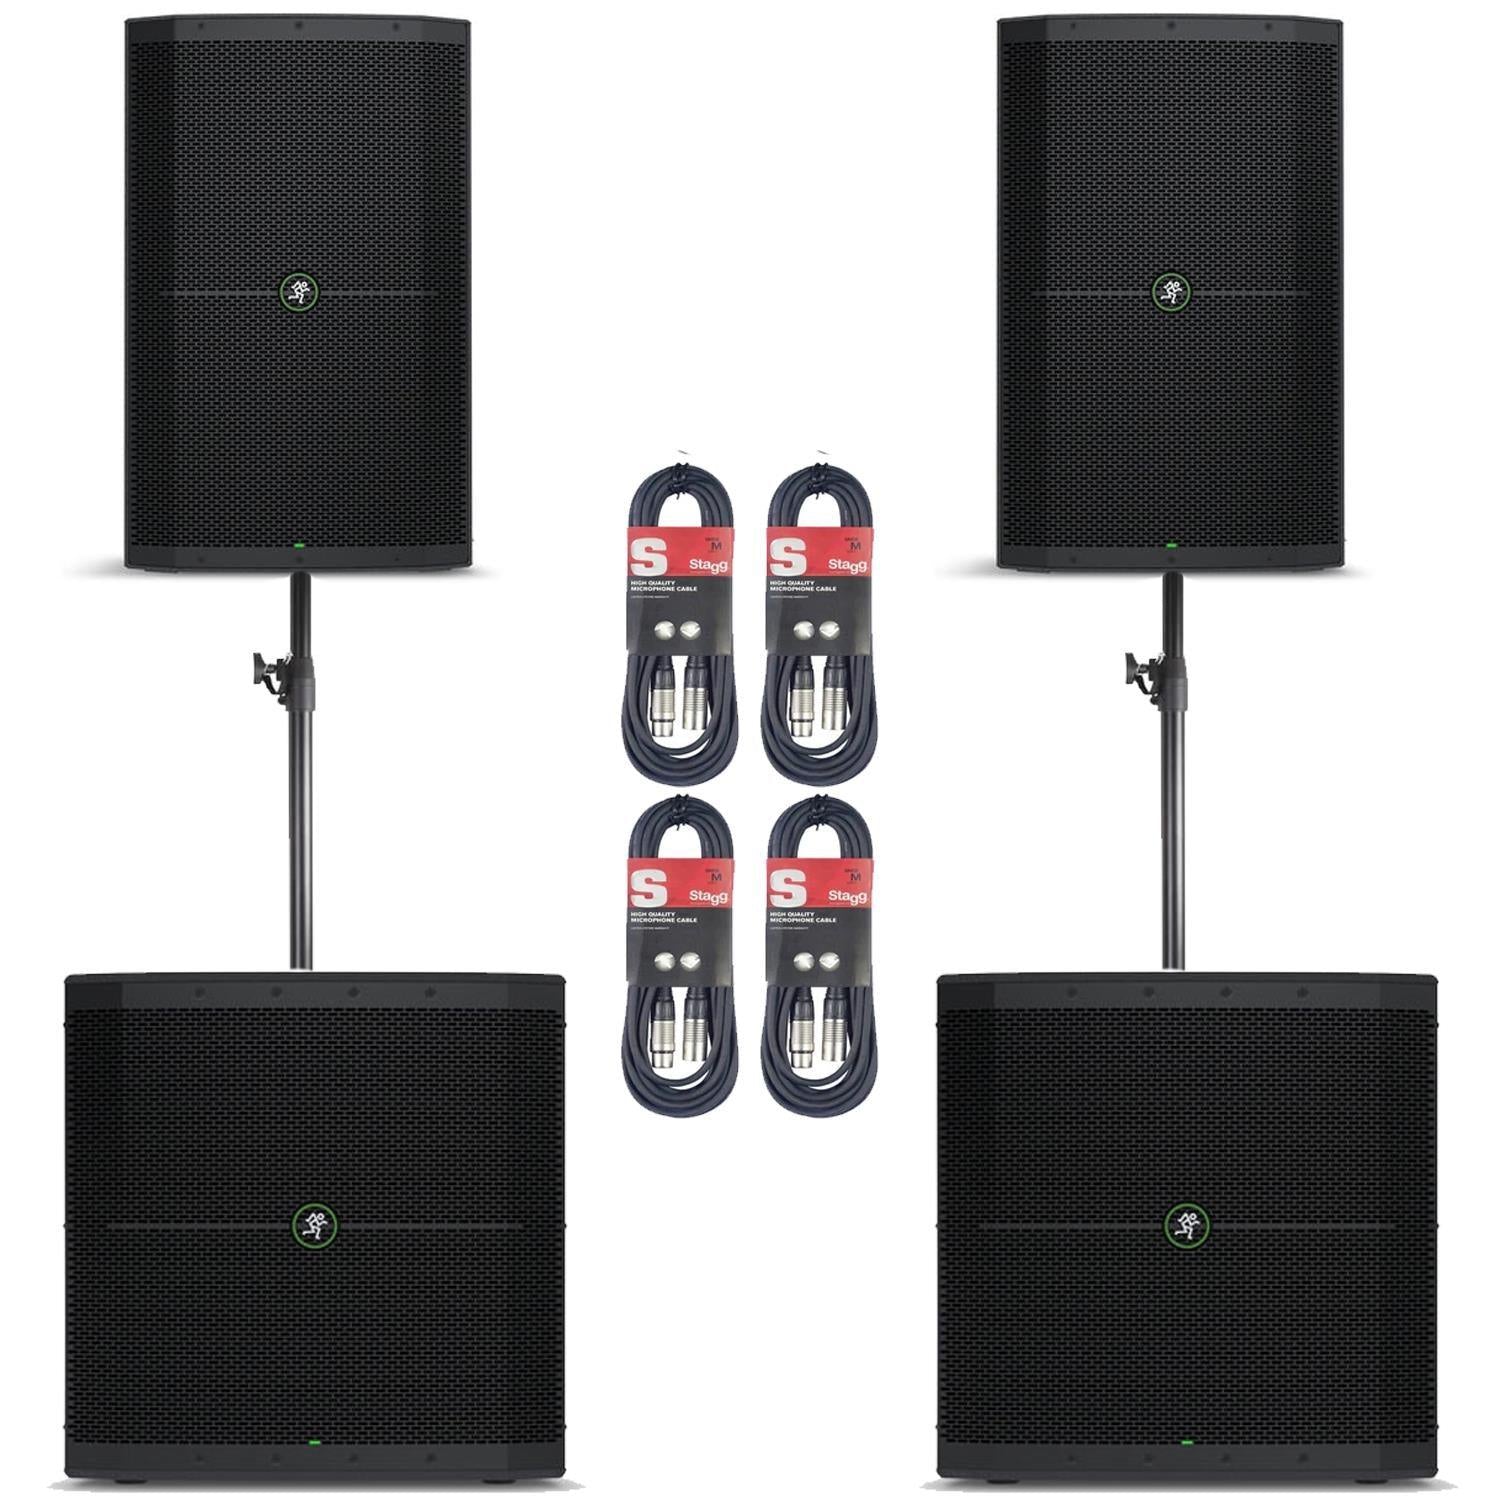 Mackie Thump 212 Speakers & Thump 115 Subwoofer Package - DY Pro Audio